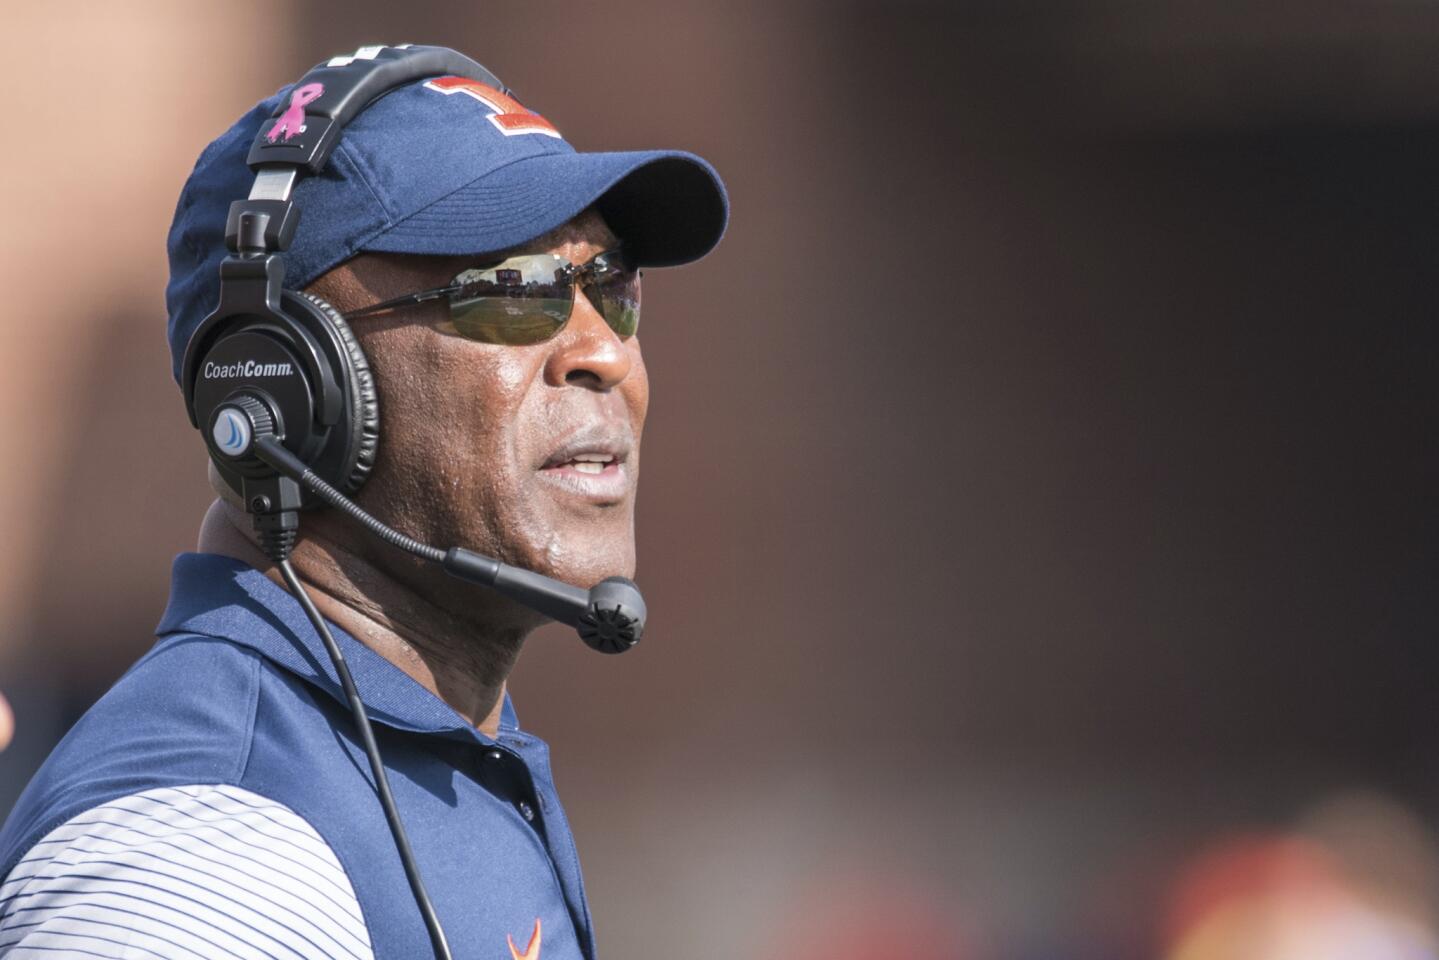 Illinois coach Lovie Smith looks at the scoreboard during the second quarter against Minnesota on Oct. 29, 2016.